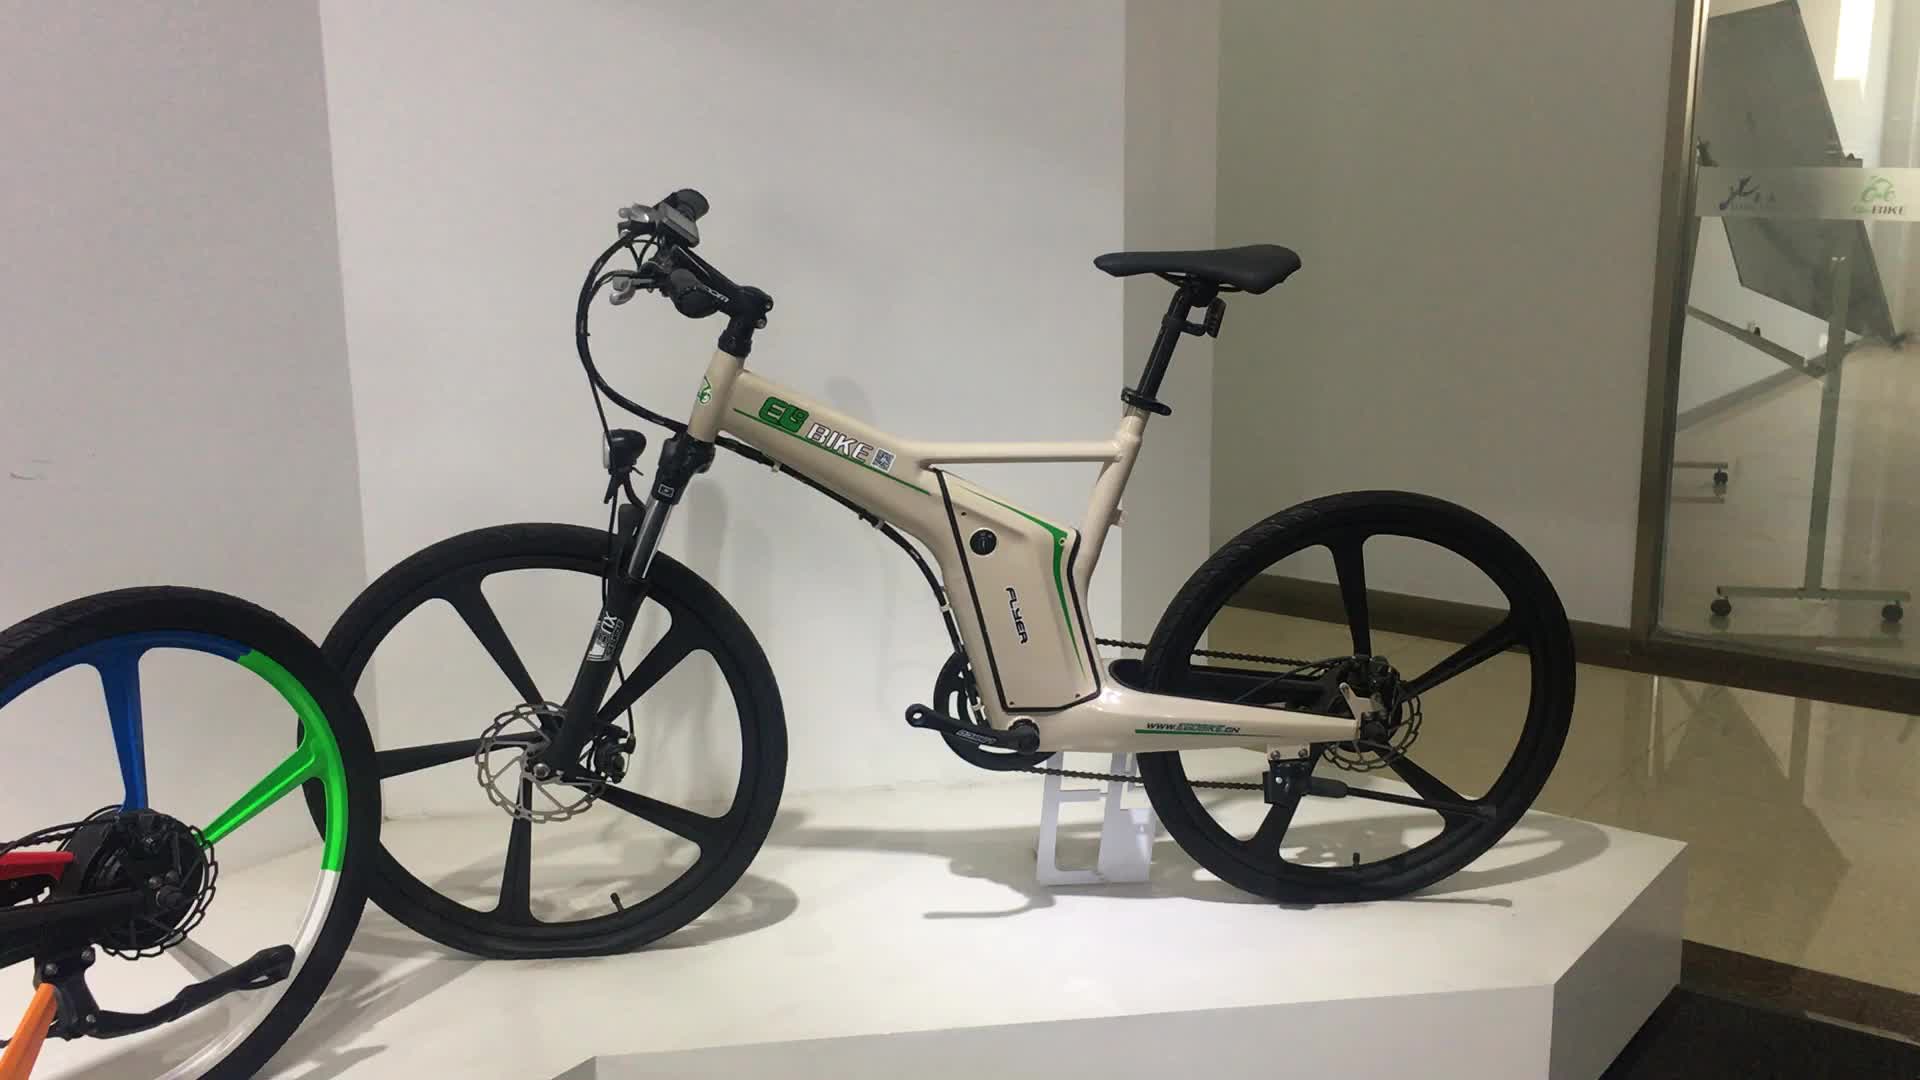 Seagull,Selfdesign Pedalic Electric Bicycle Germany For